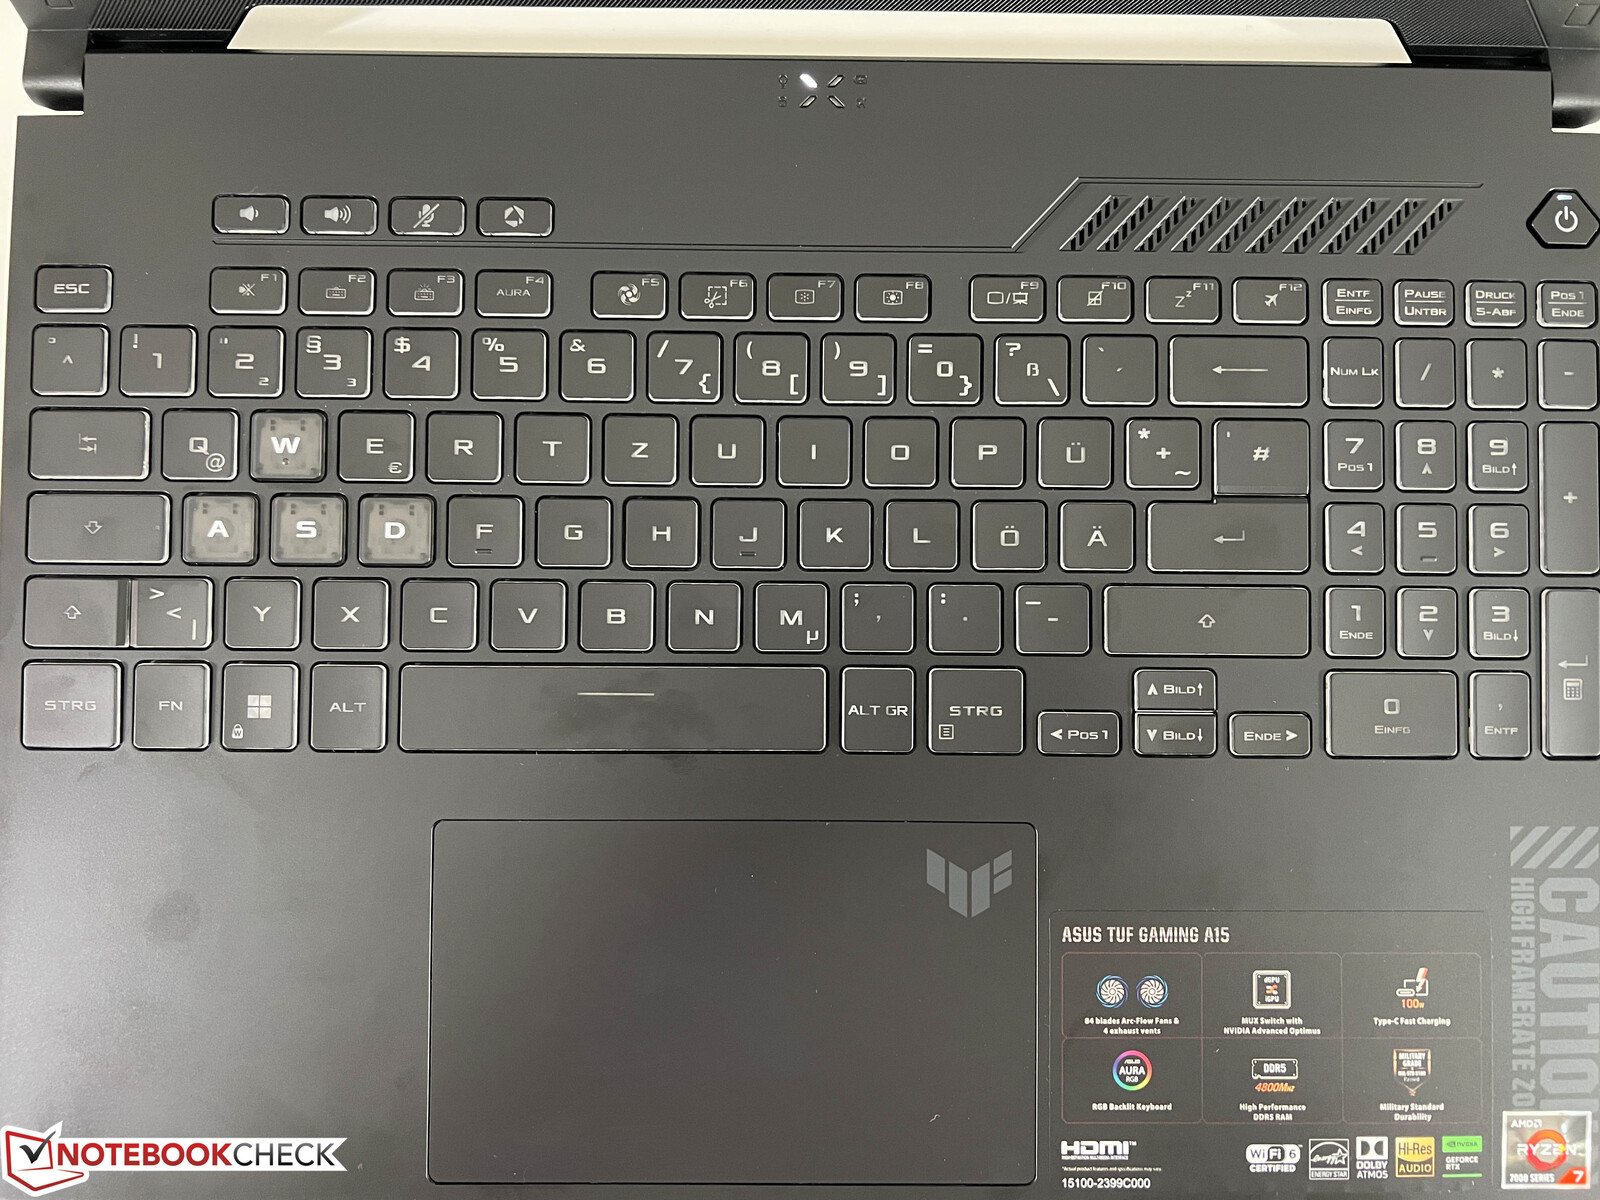 Touche Clavier asus f f751 touches chiclets blanches - Touche-clavier -portable.com